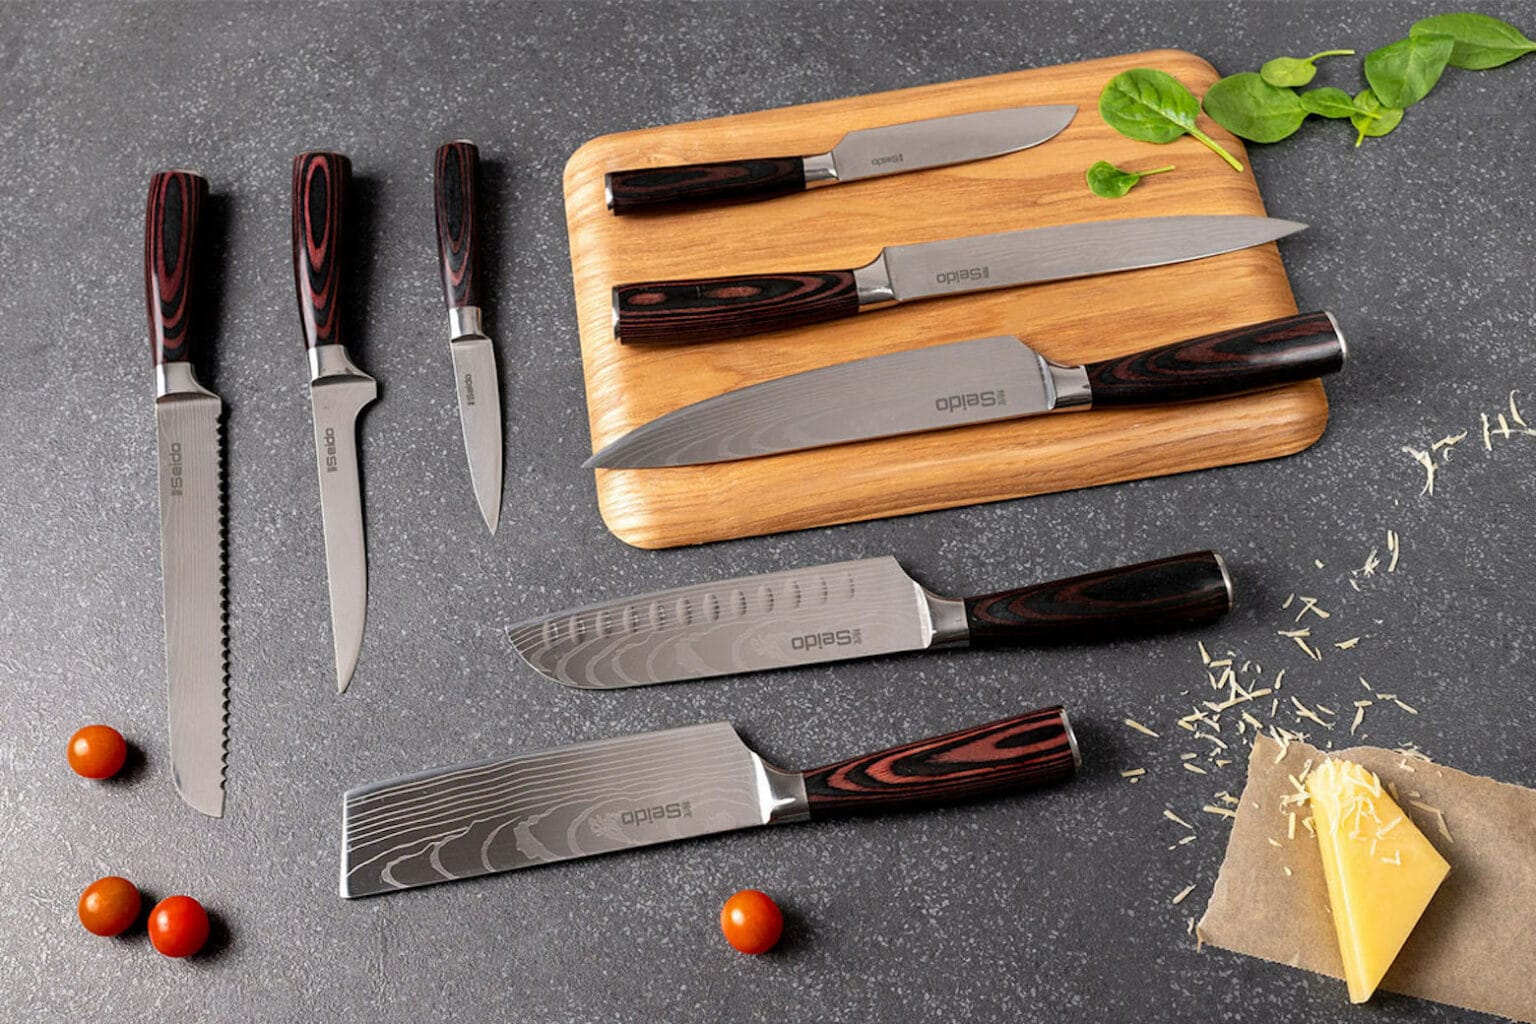 For under $140, you can snag these premium Japanese chef knives.